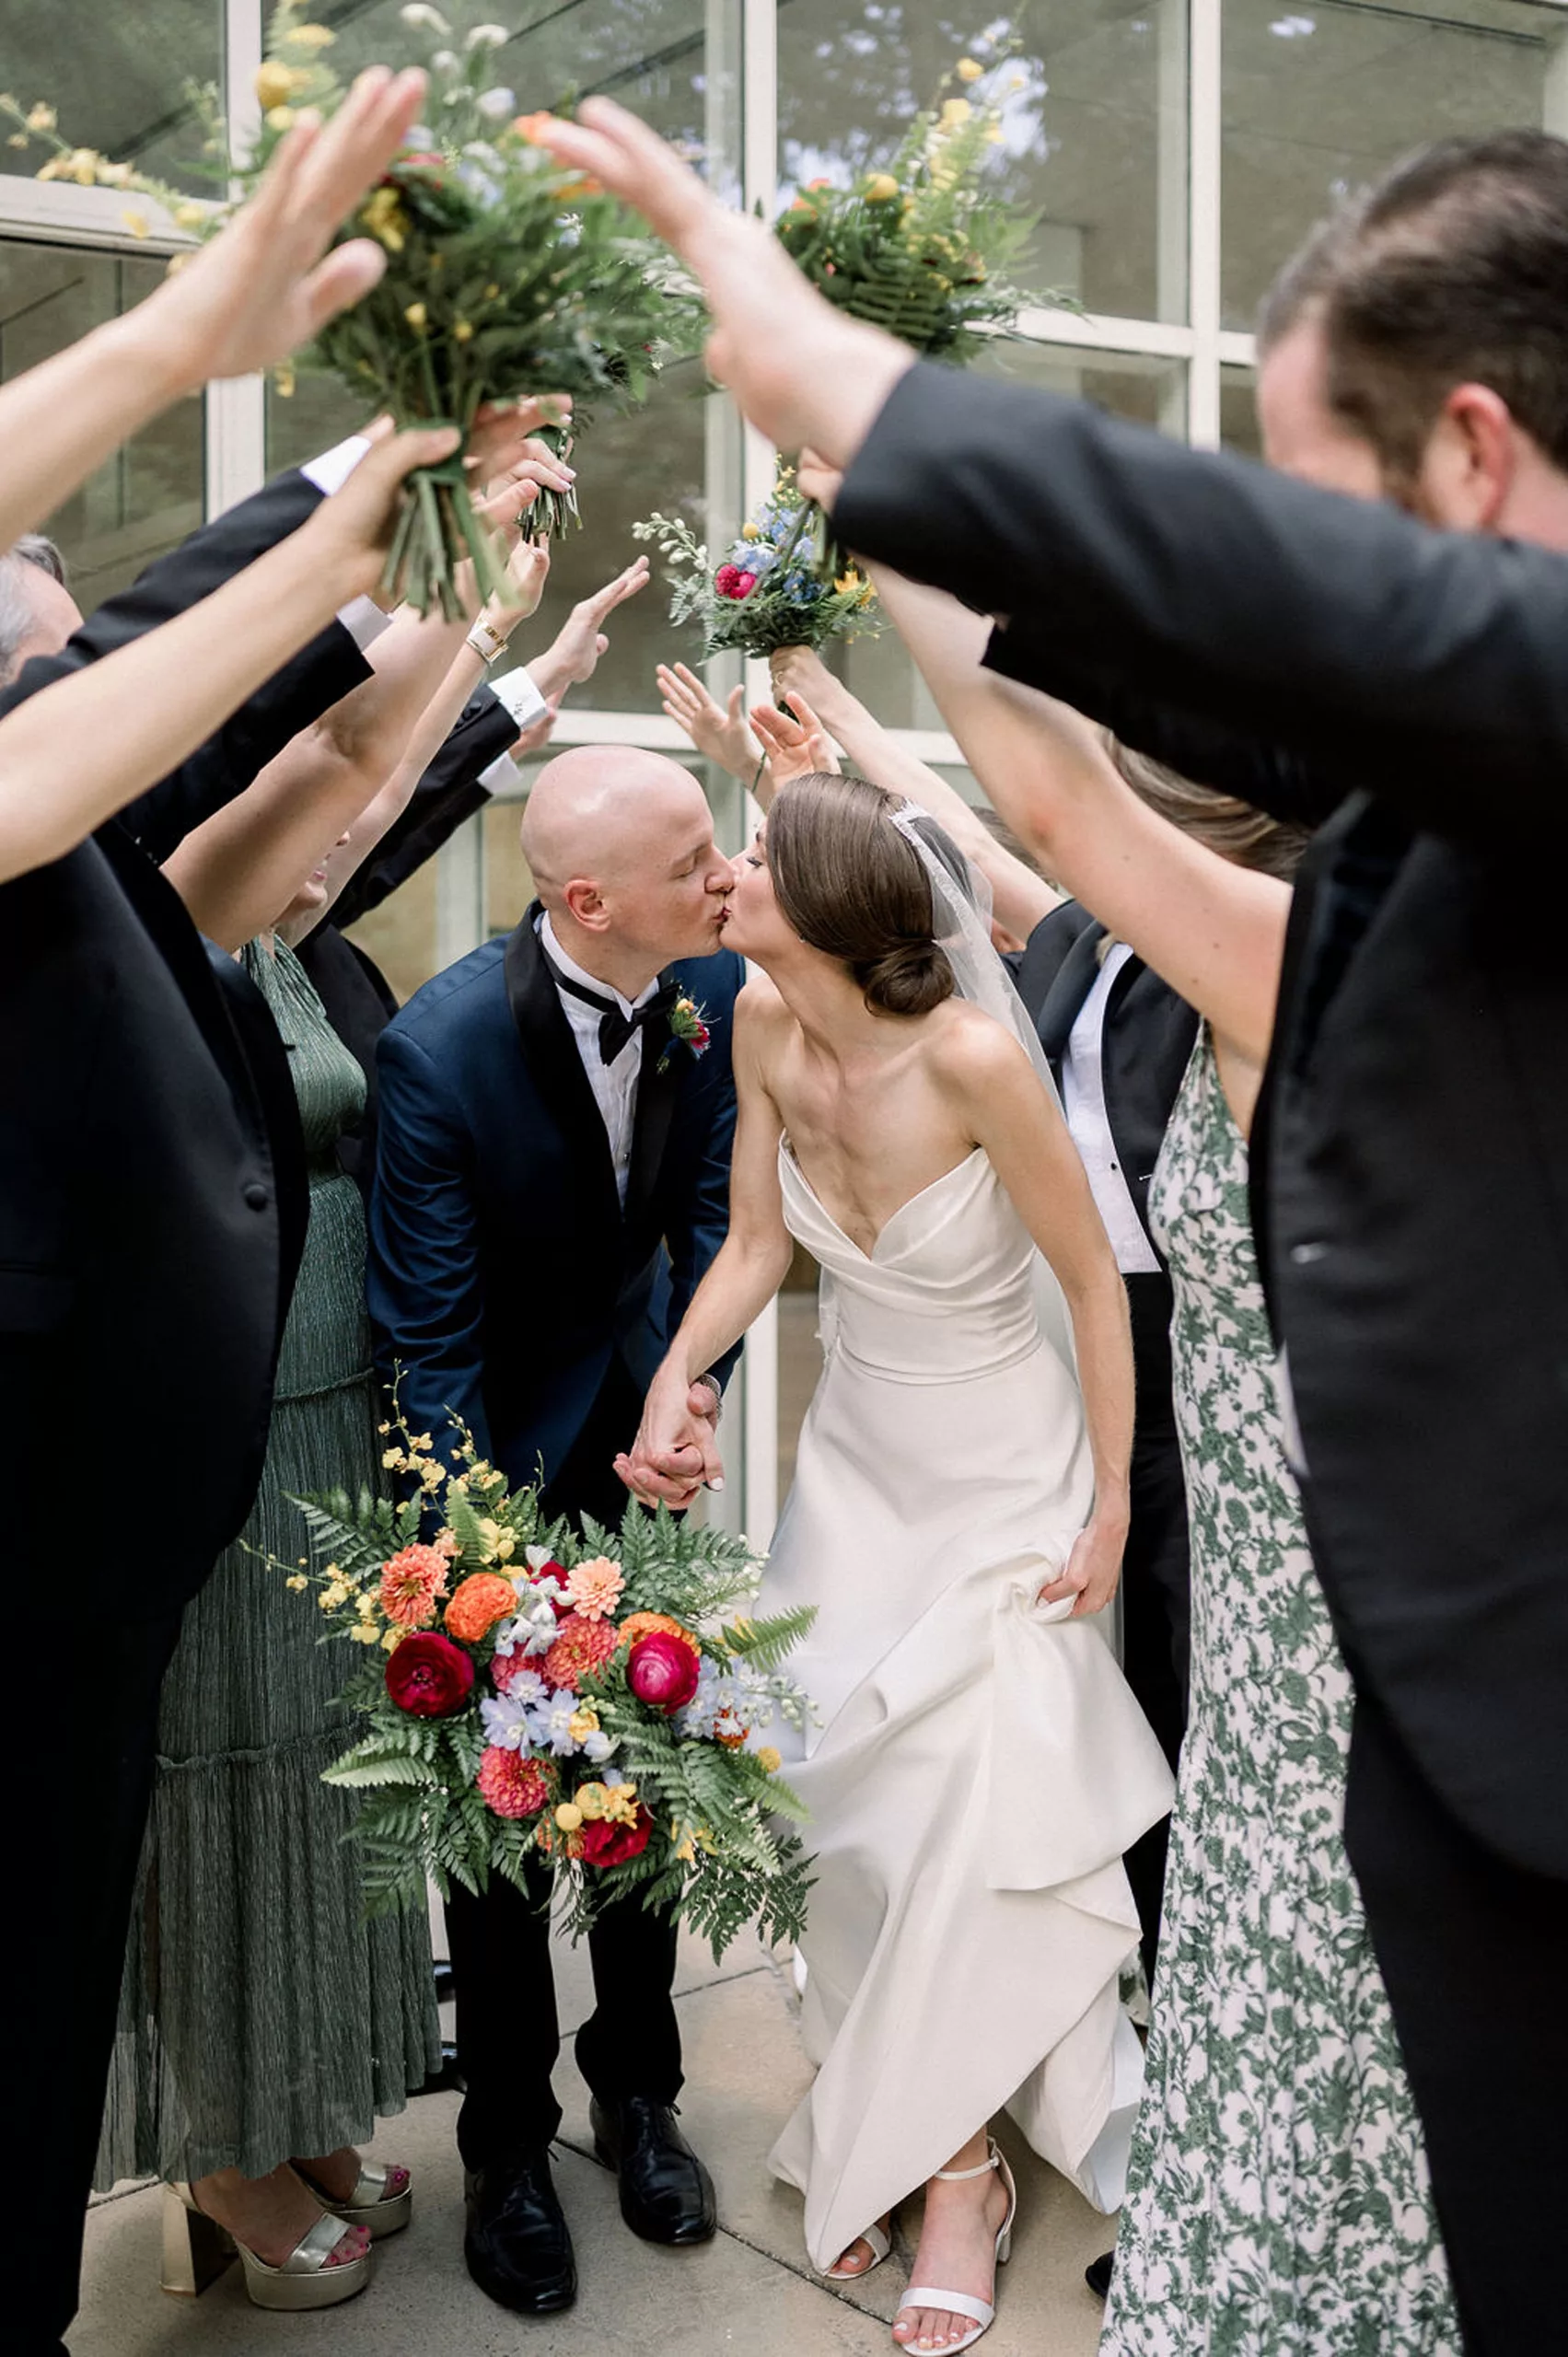 Newlyweds kiss under the hands and bouquets of their guests